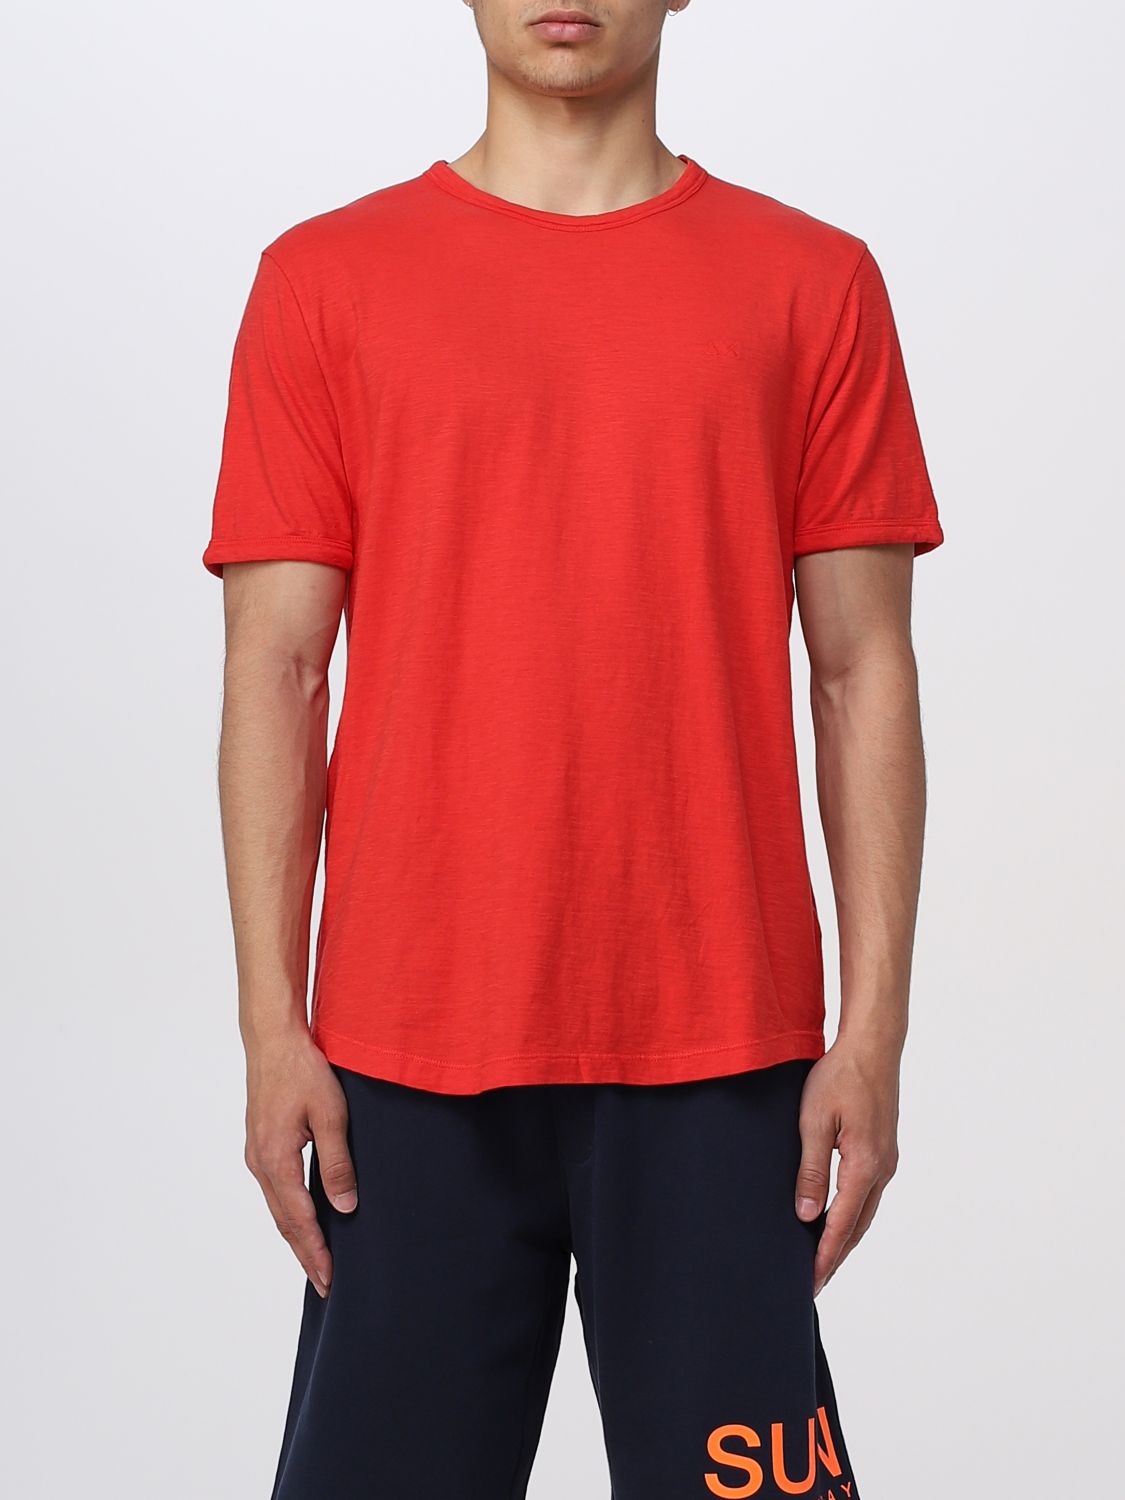 SUN 68: t-shirt for man - Red | Sun 68 t-shirt T33115 online on GIGLIO.COM